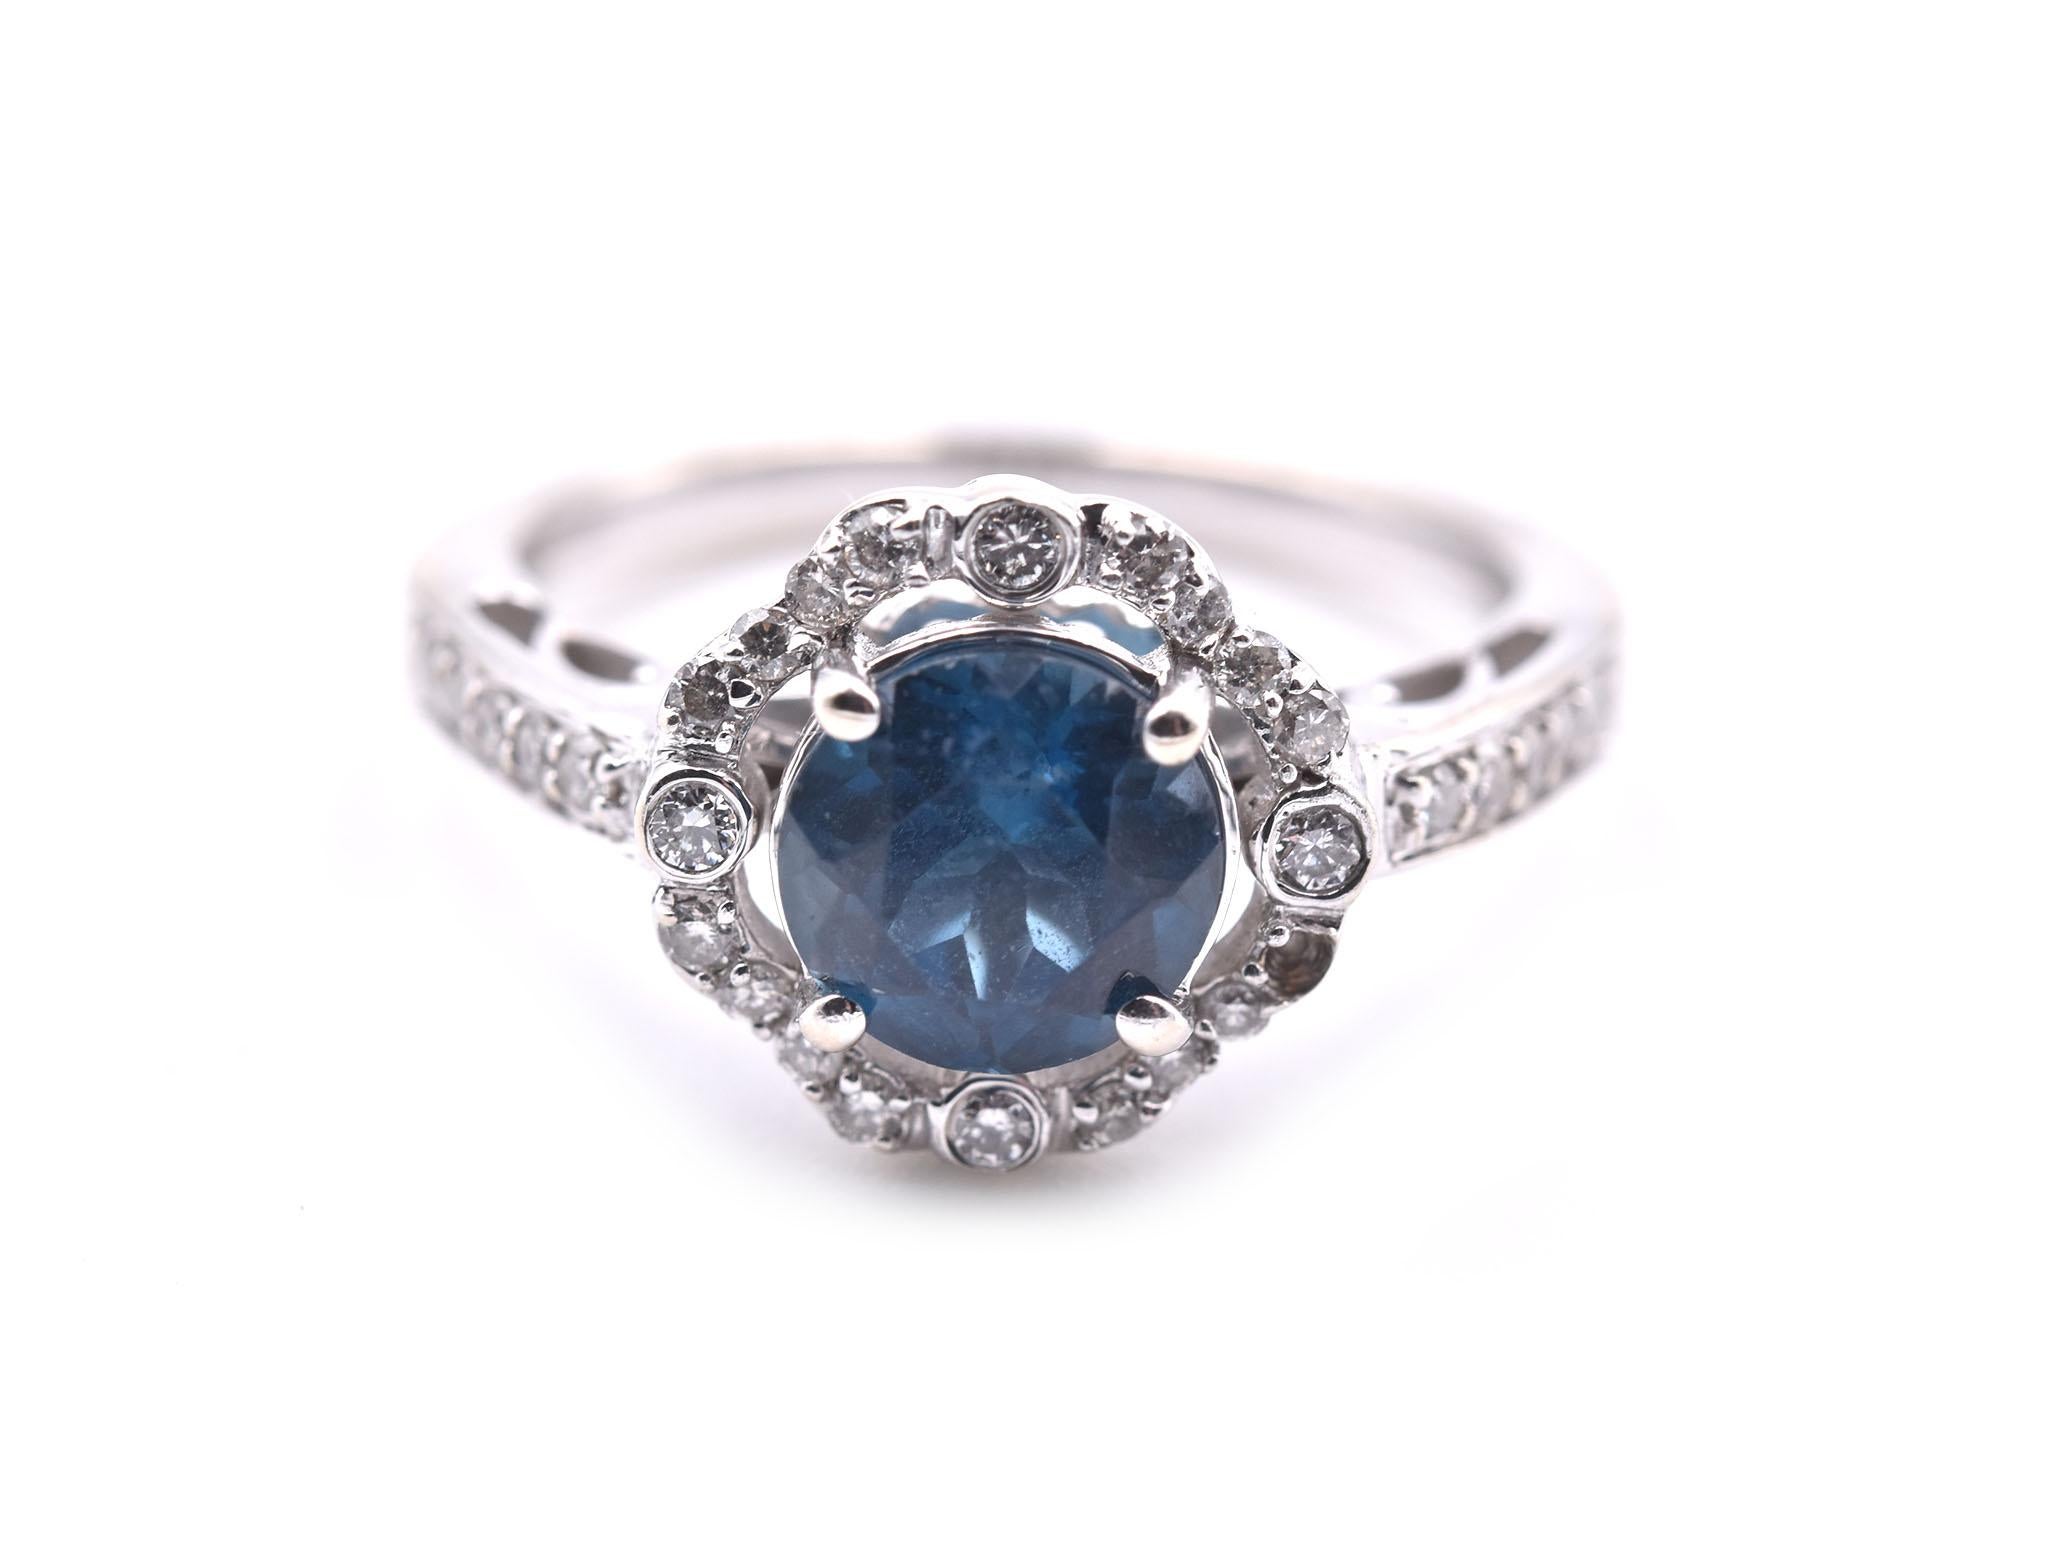 Designer: custom design
Material: 14k white gold 
London Blue Topaz: 1 round faceted cut= 1.50ct
Diamonds: round brilliant cut= .21cttw
Color: G	
Clarity: VS
Ring Size: 6 ¾ (please allow two additional shipping days for sizing requests)
Dimensions: